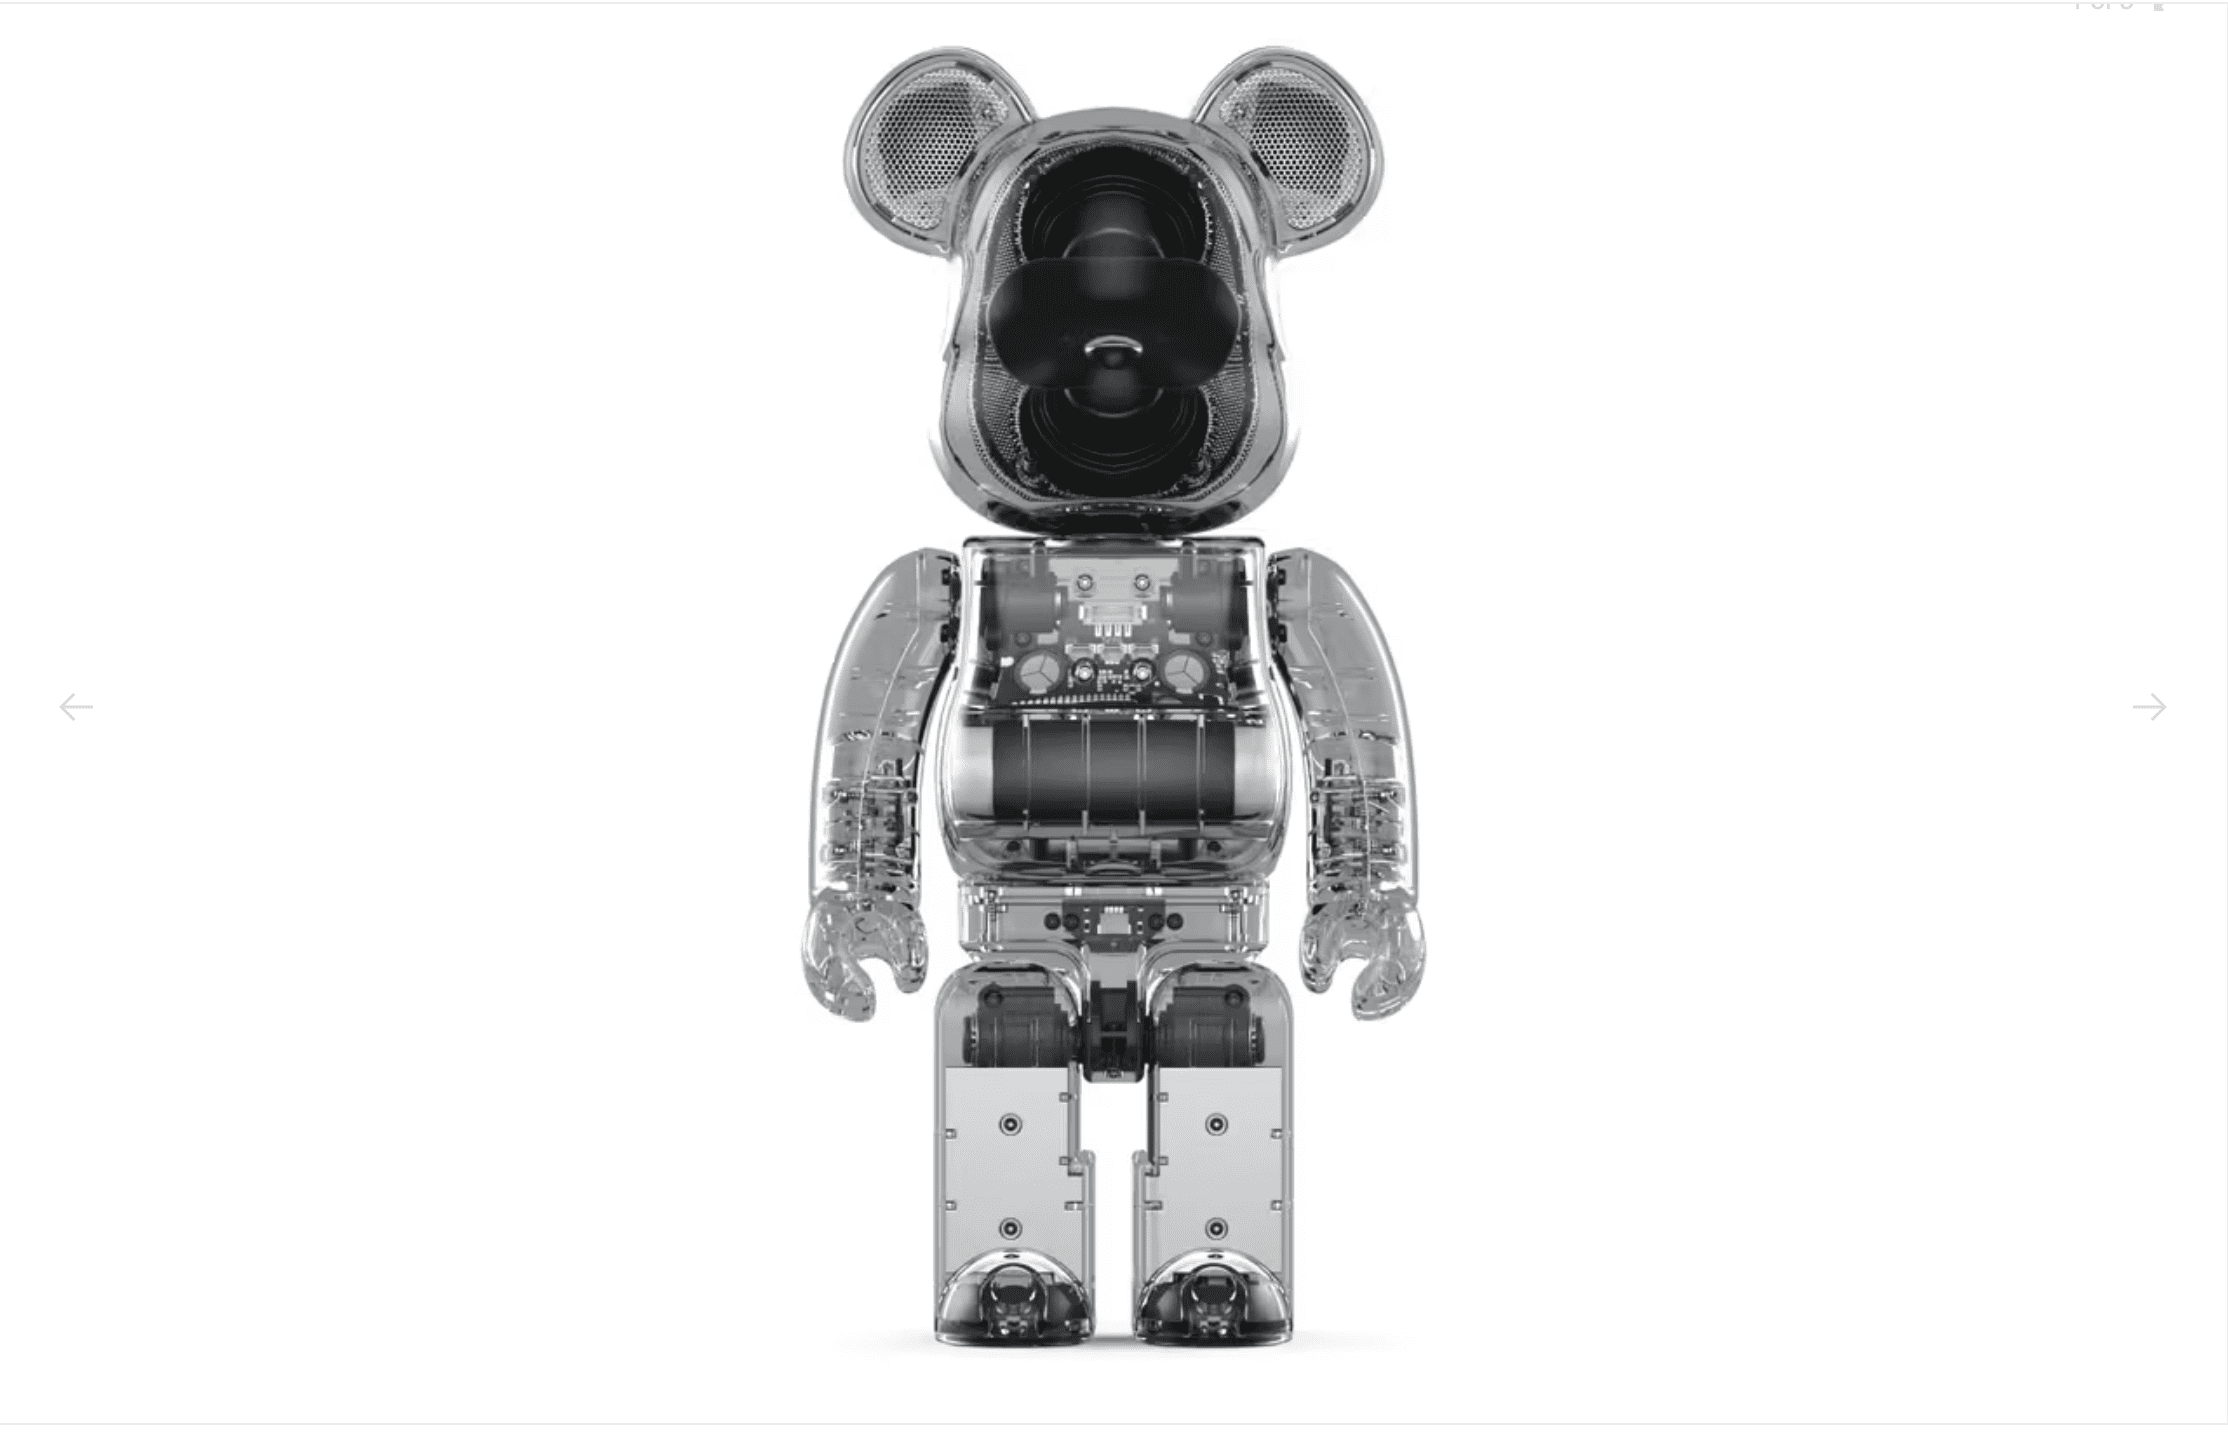 Be@rbrick Launches Surprisingly Advanced Bluetooth Speaker